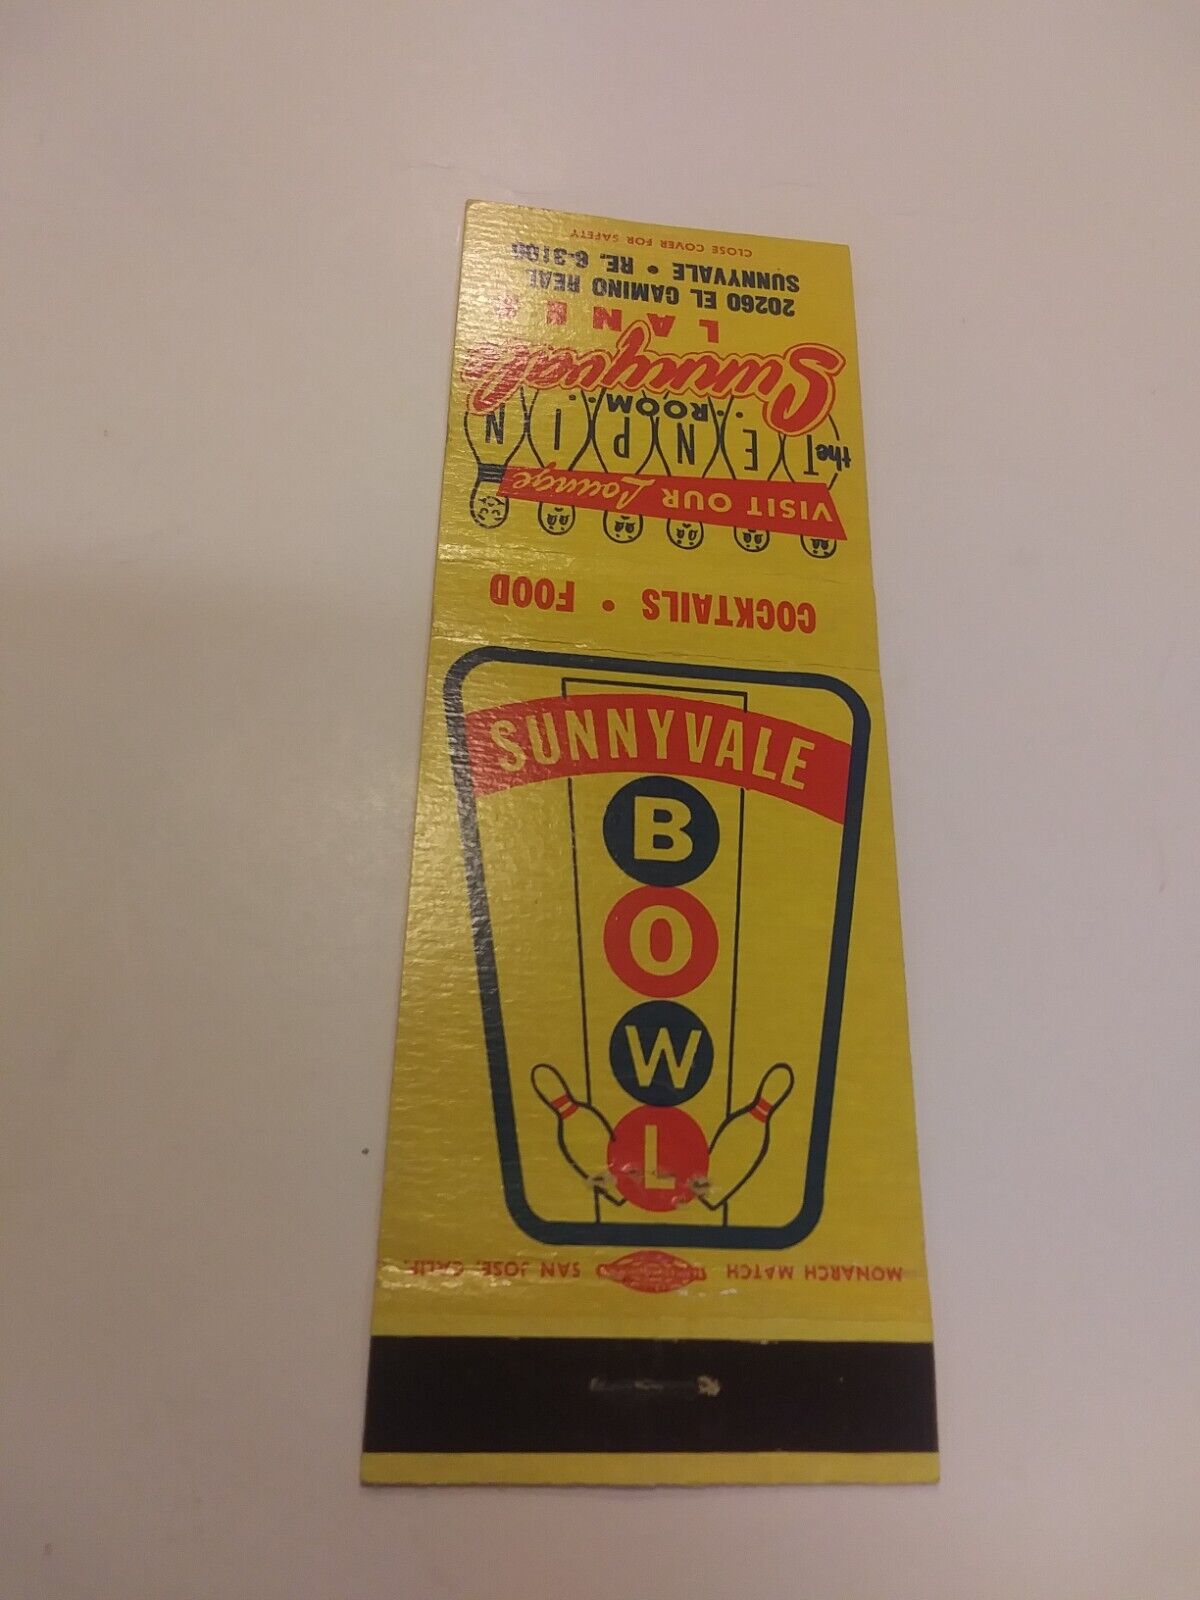 Vintage Sunnyvale Bowl The Tin Pin Room Sunnyvale Lanes Bowling Alley Matchbook